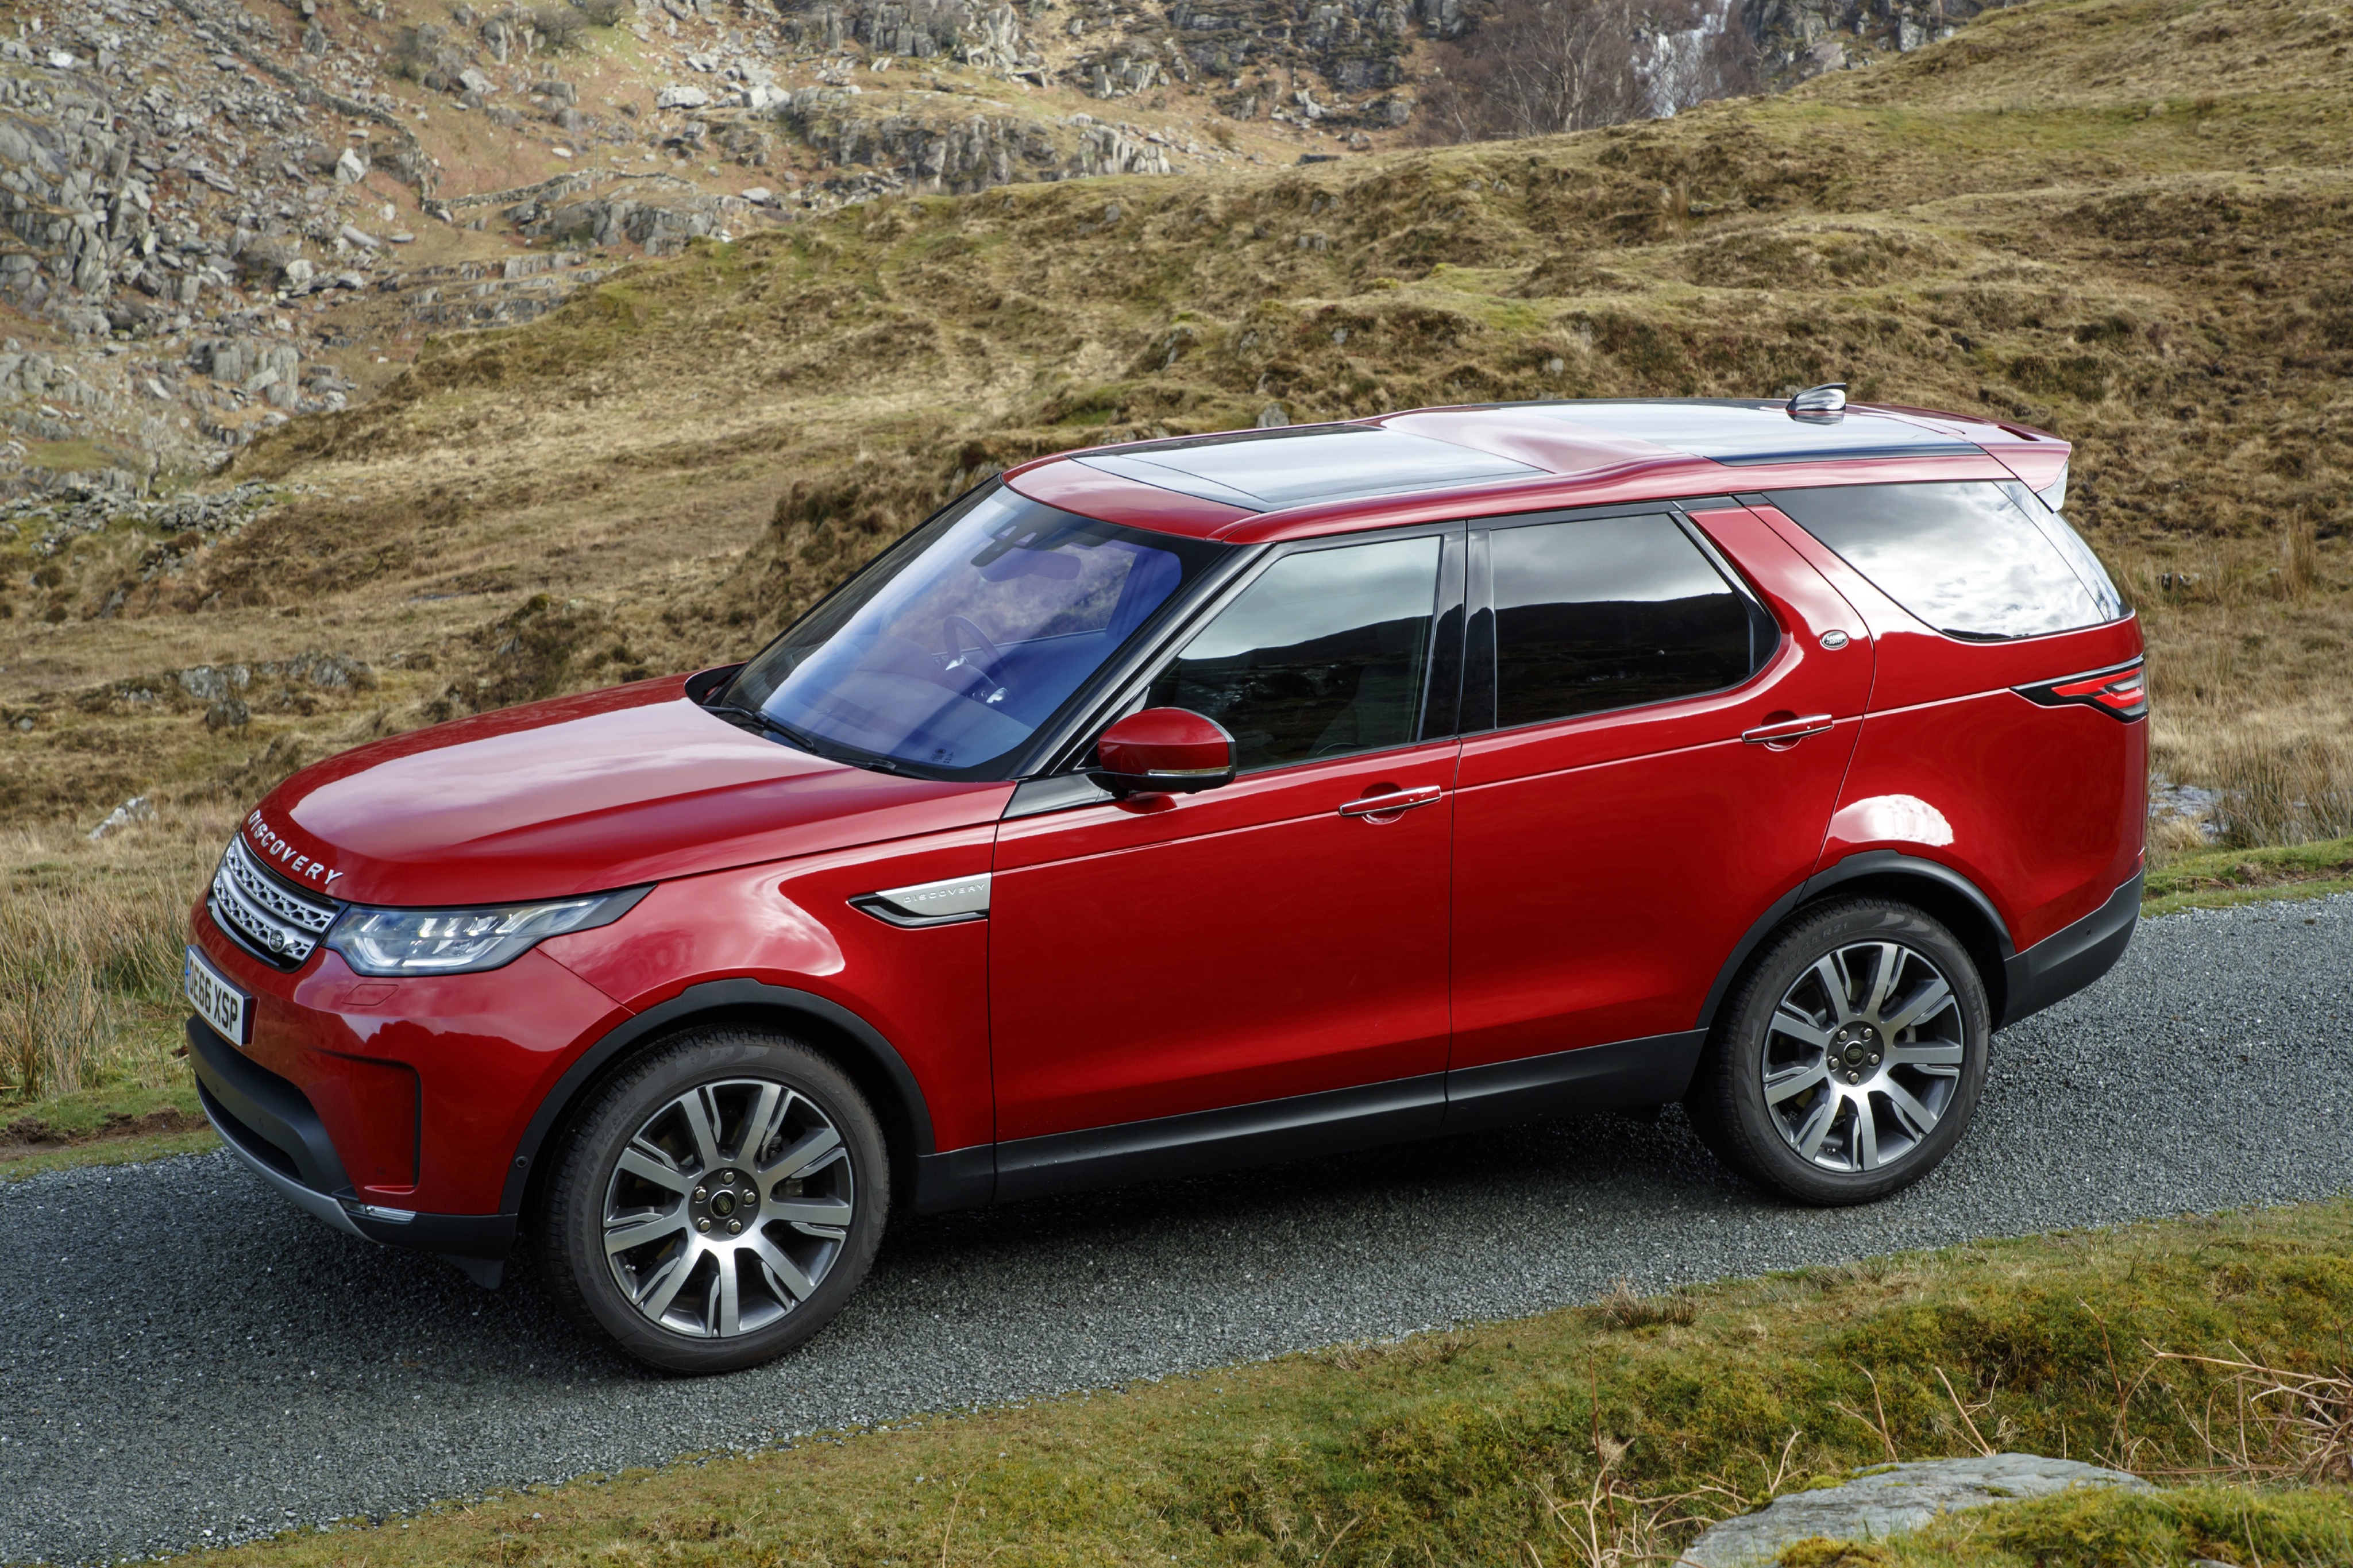 Car Land Rover Land Rover Discovery Luxury Car Red Car Suv Vehicle 4096x2730